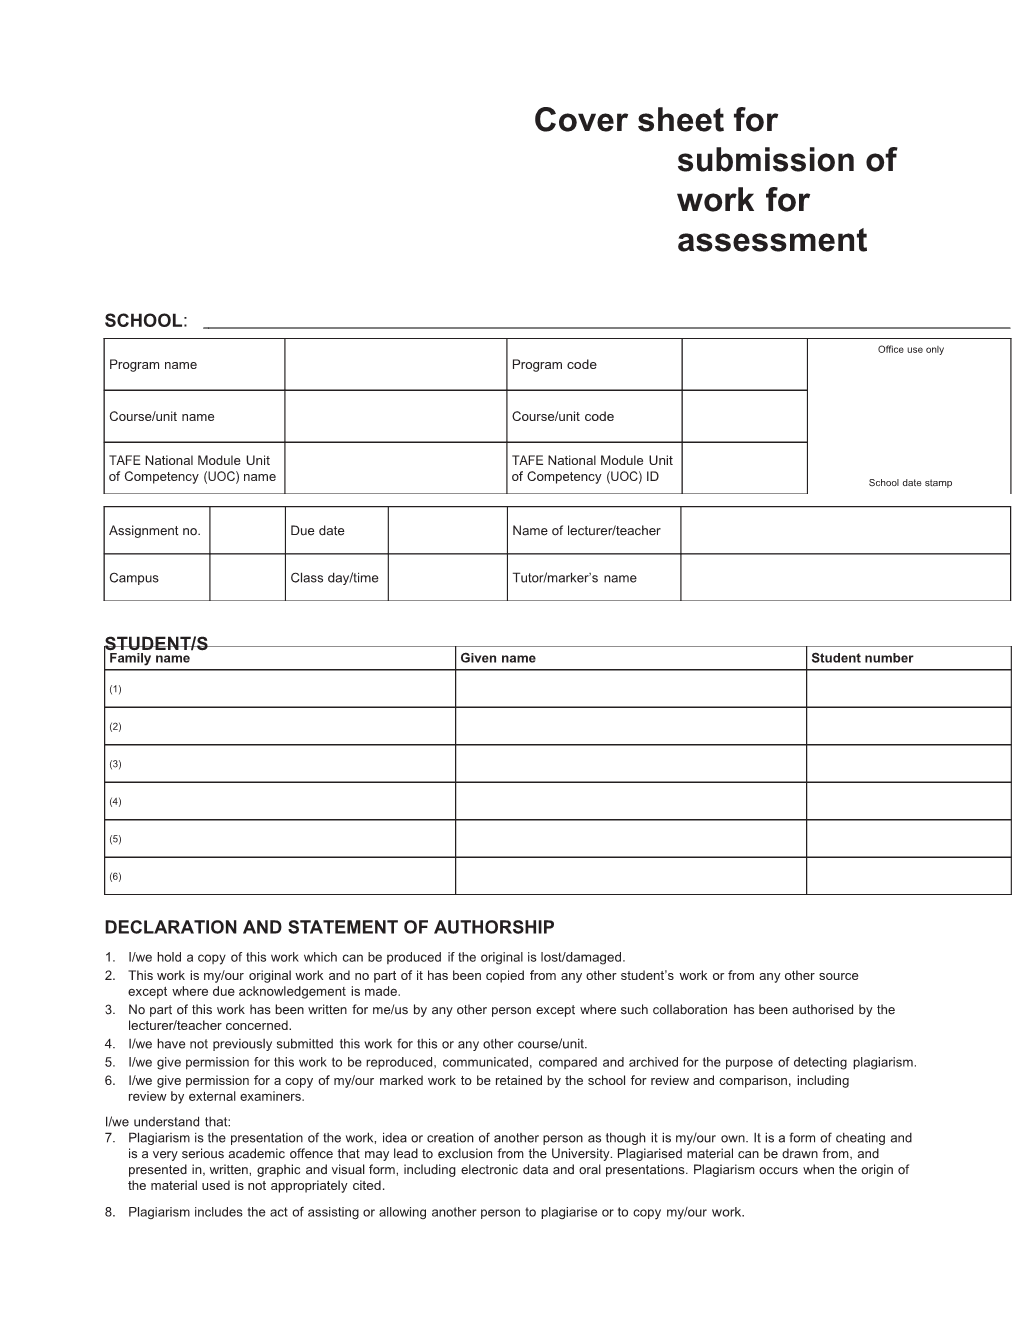 Cover Sheet for Submissionof Workfor Assessment